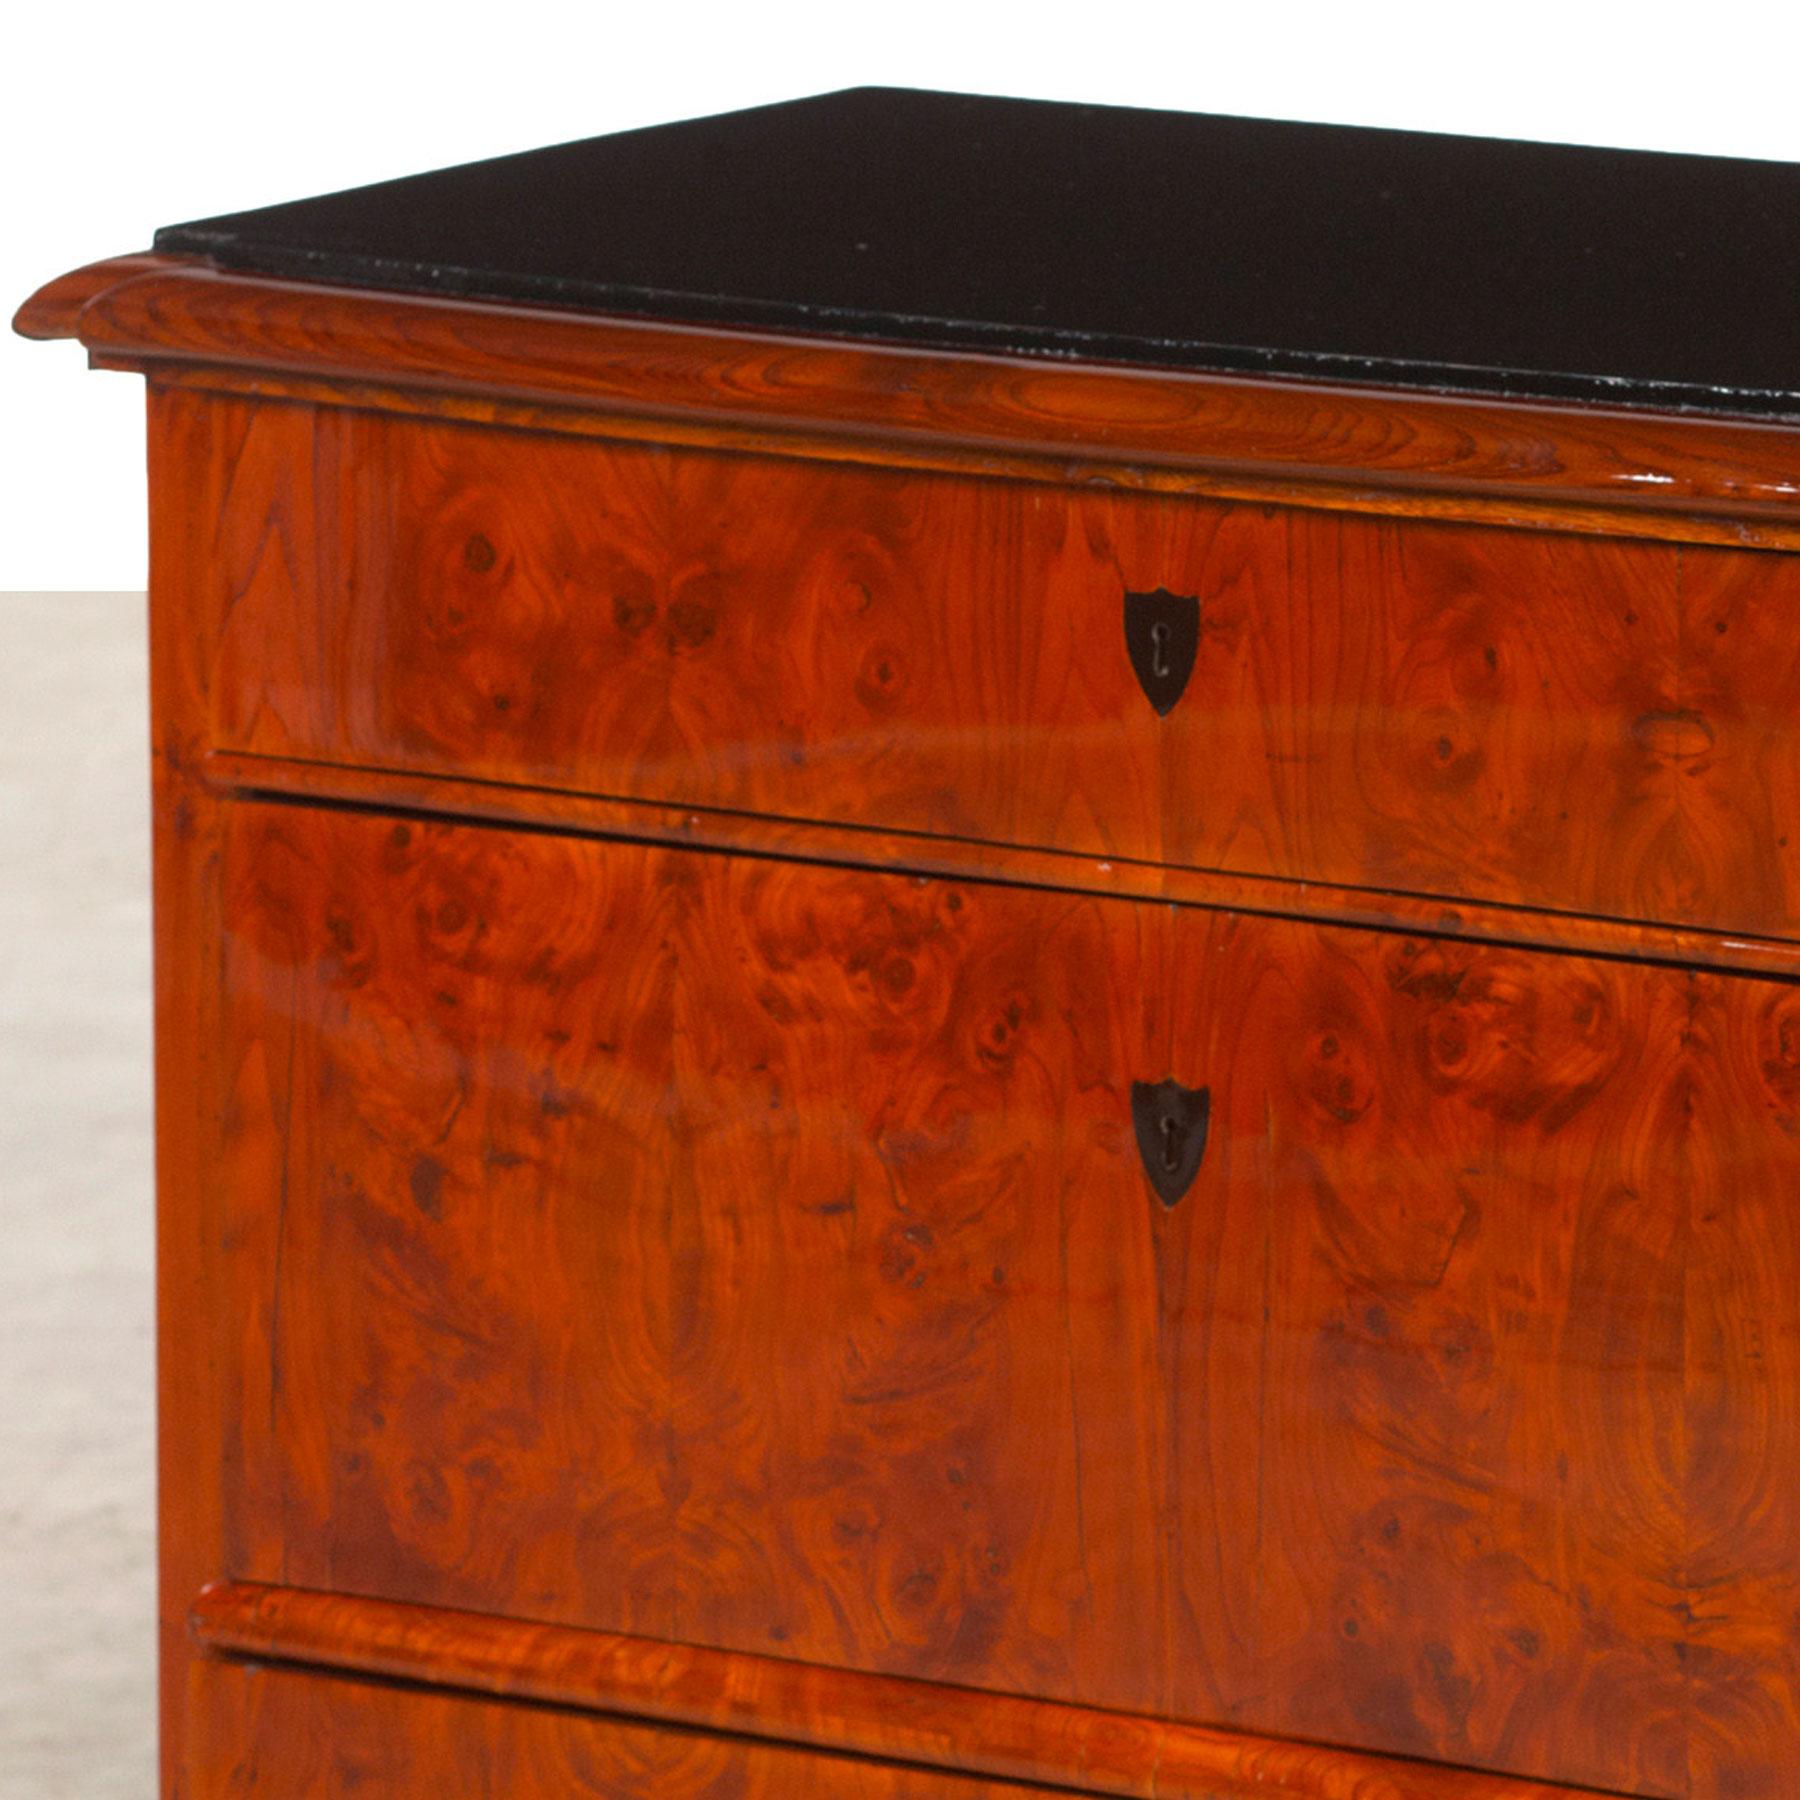 Danish Late Empire chest of drawers (also called Biedermeier), elmwood veneered with ebonized top, 1820-1830. The chest of drawers has a natural beautiful patina. The finish is French polish.